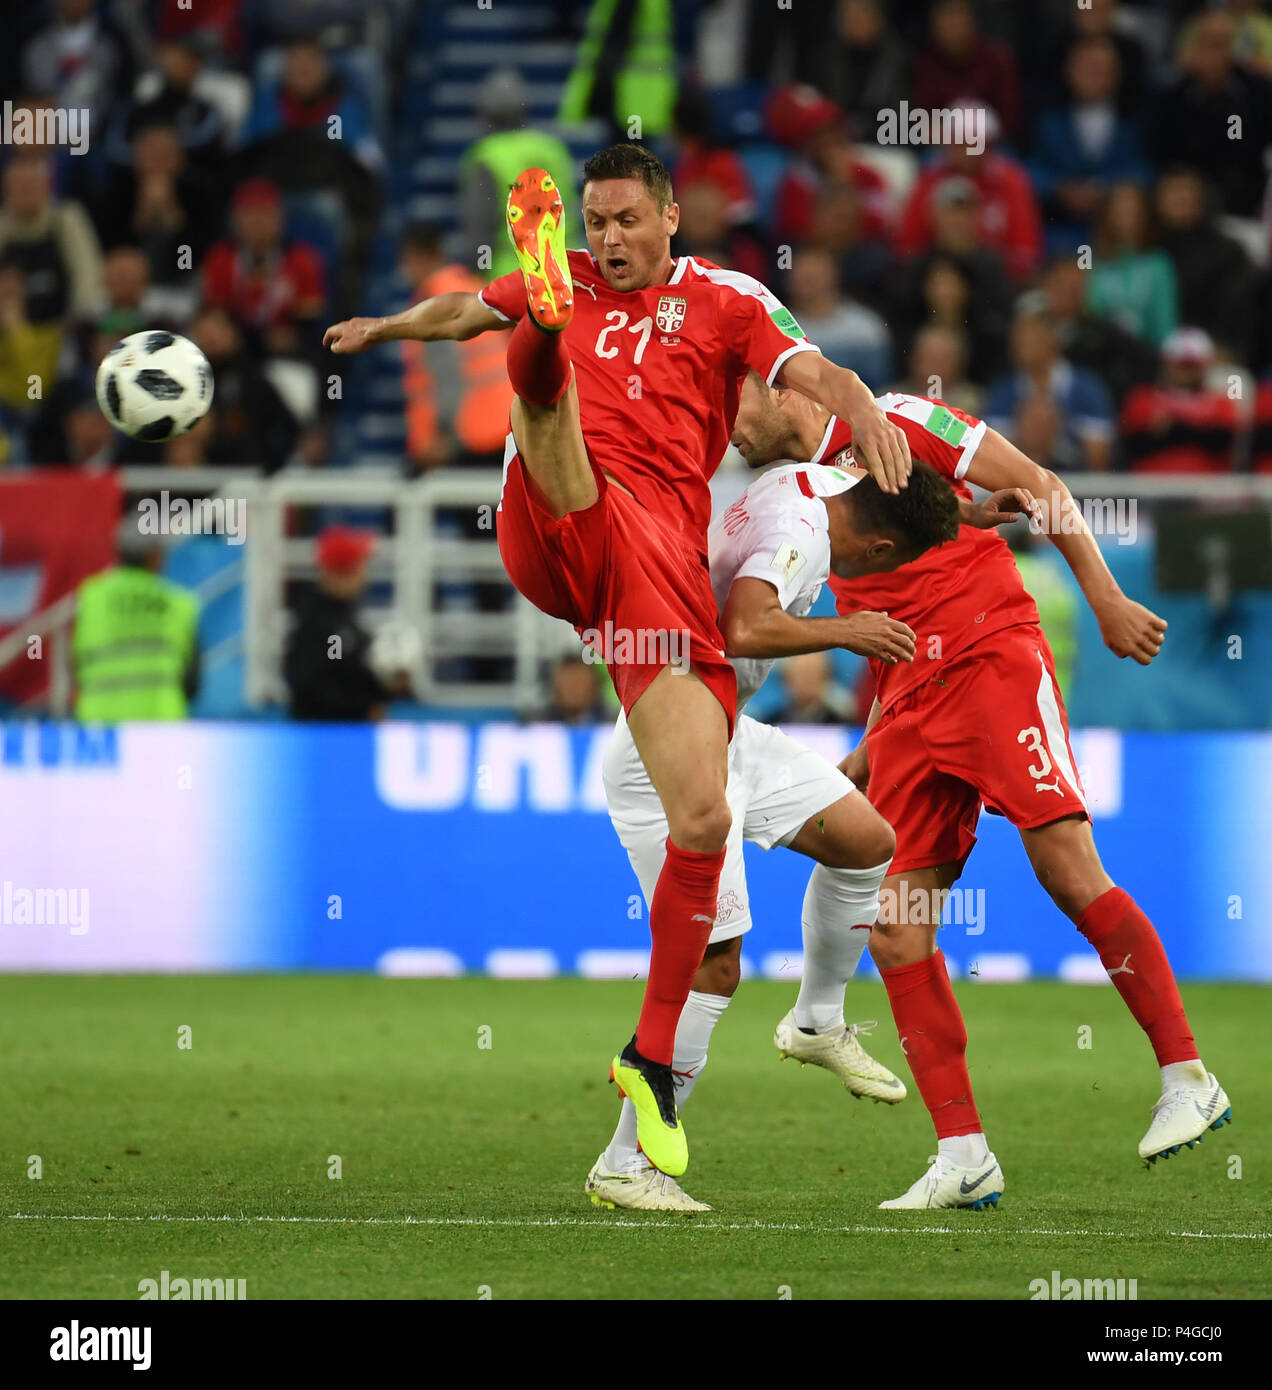 Kaliningrad, Russia. 22nd June, 2018. Nemanja Matic (L) of Serbia competes during the 2018 FIFA World Cup Group E match between Switzerland and Serbia in Kaliningrad, Russia, June 22, 2018. Credit: Chen Cheng/Xinhua/Alamy Live News Stock Photo